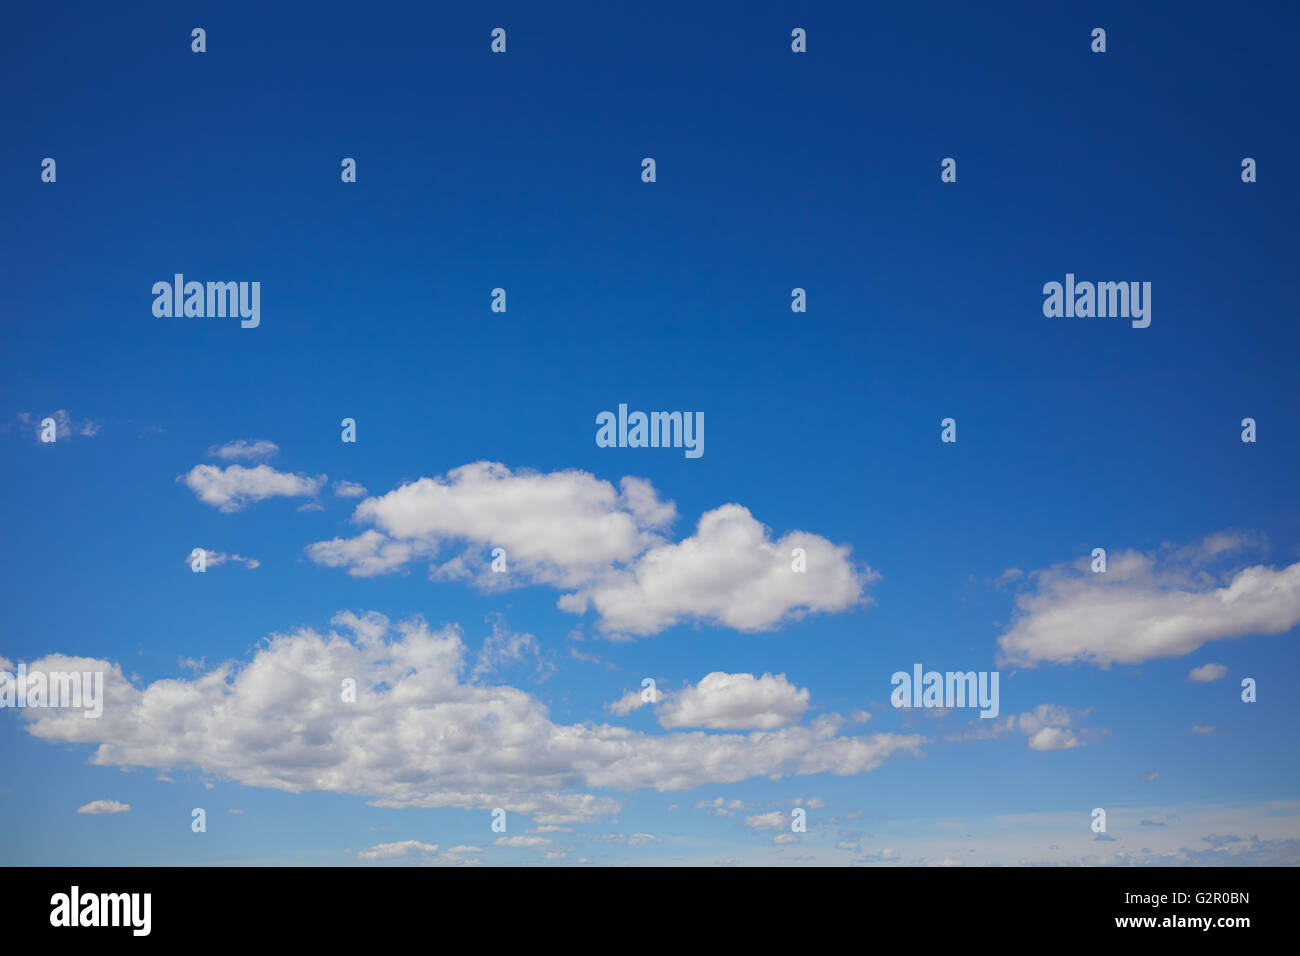 Blue summer sky in Mediterranean sea with white clouds Stock Photo